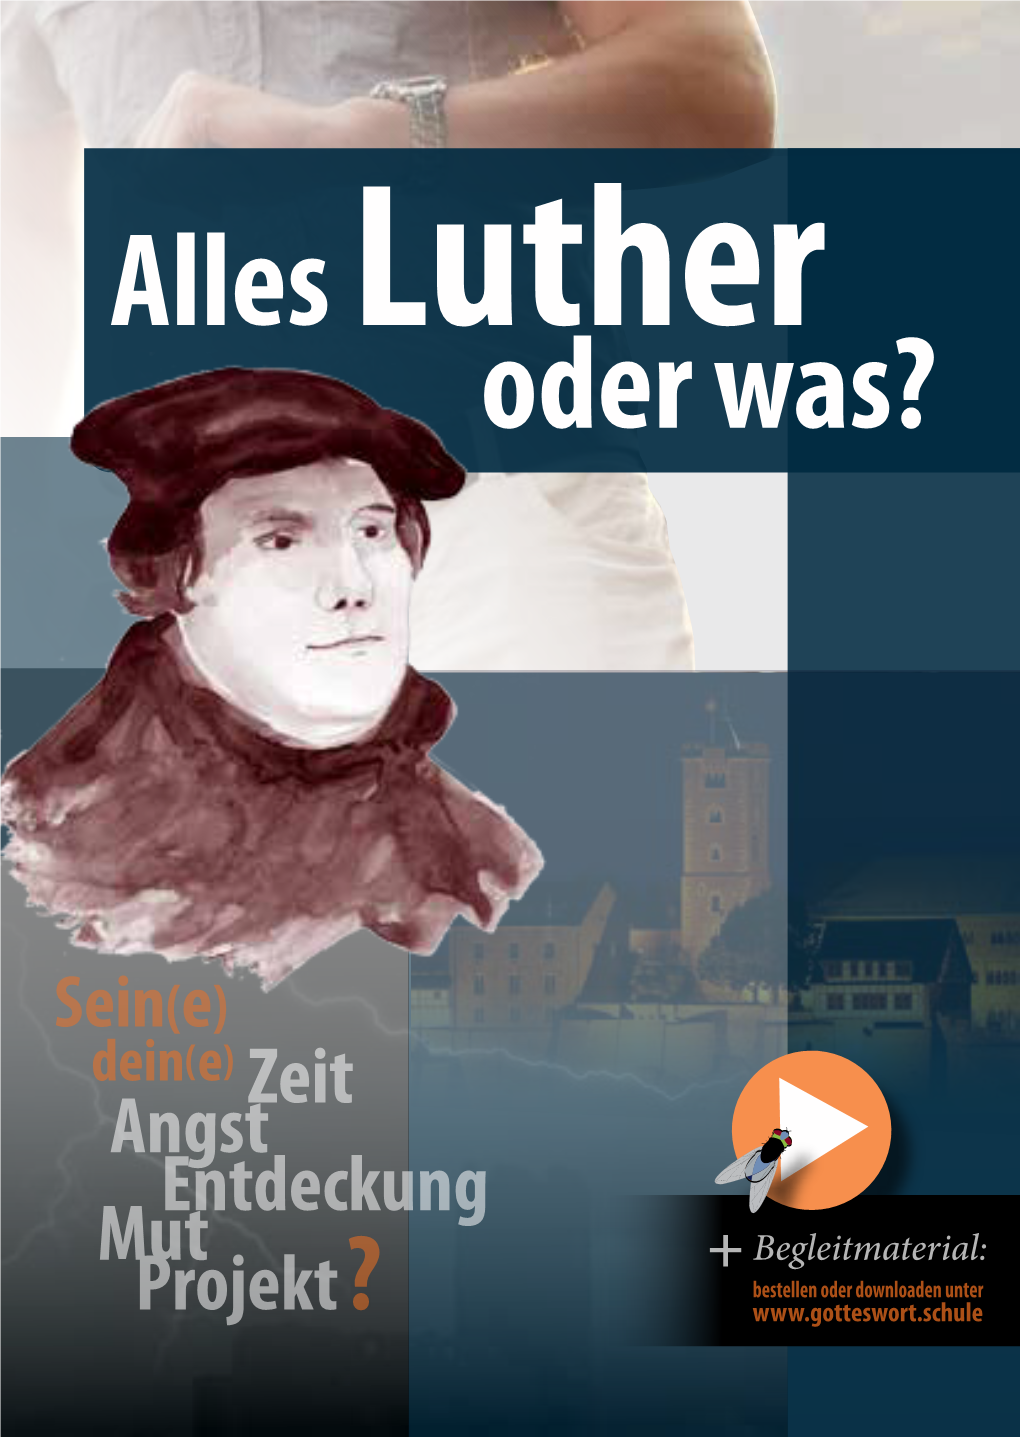 Alles Luther Oder Was?